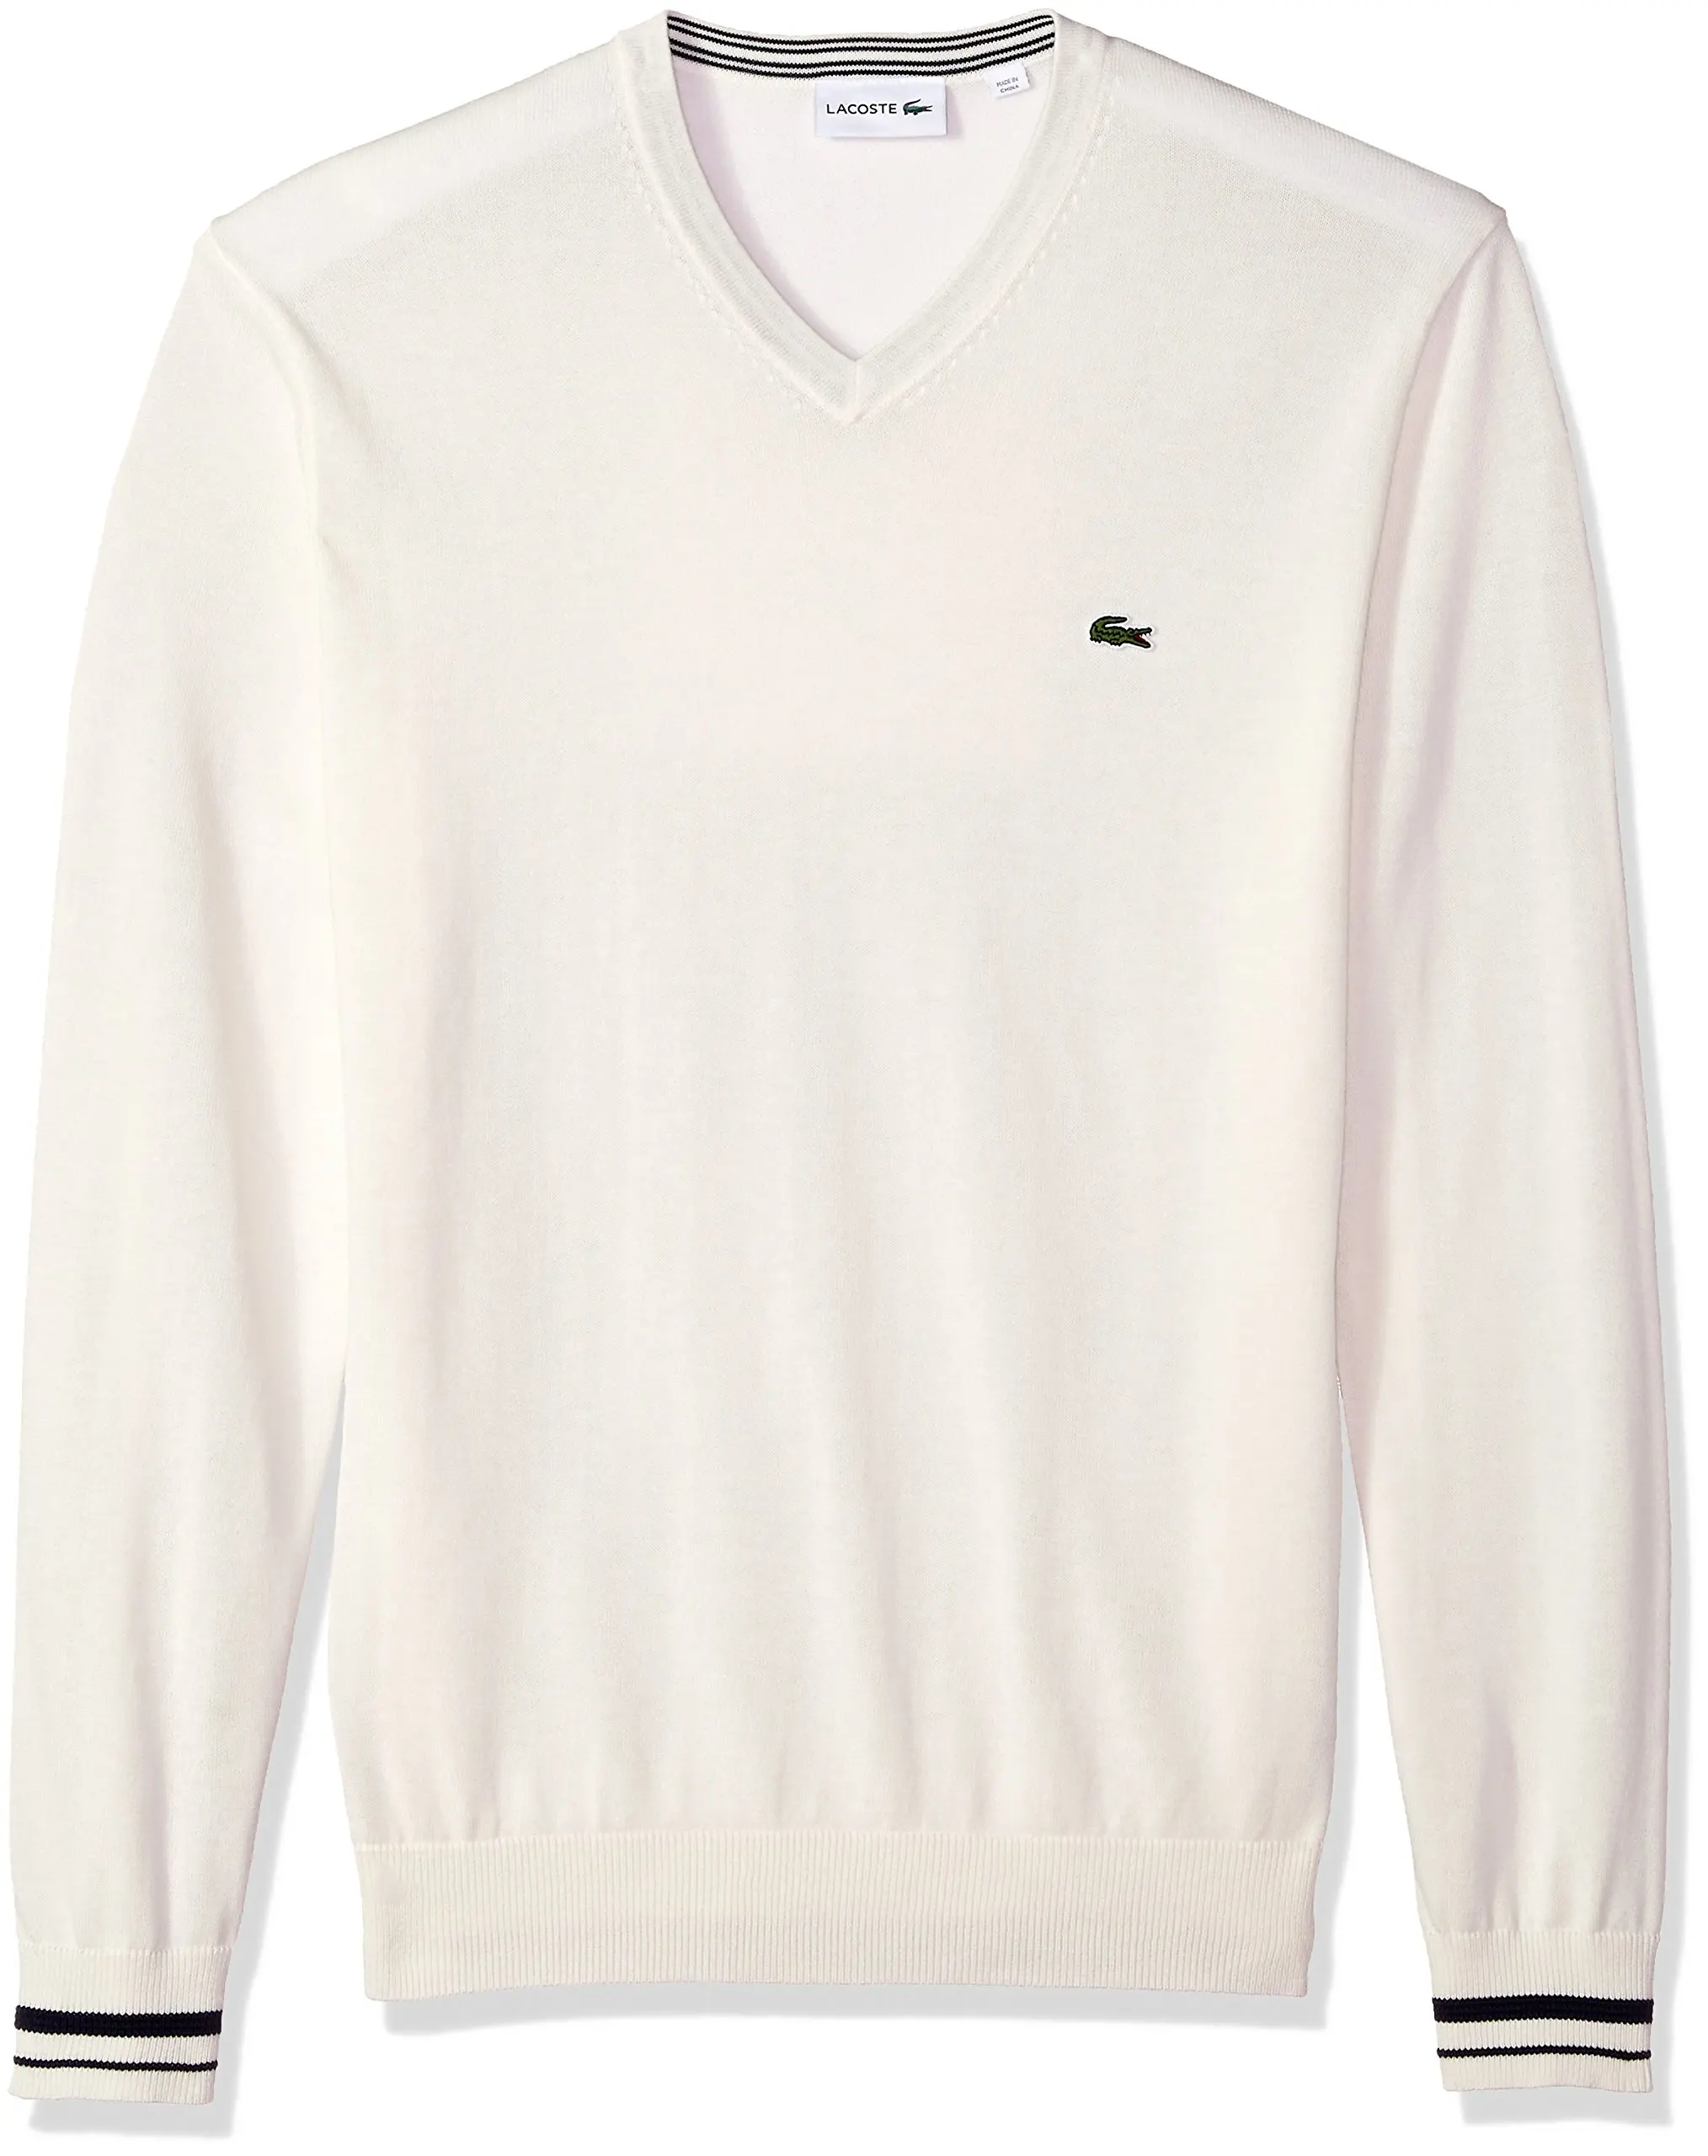 Cheap Lacoste Sweater, find Lacoste 